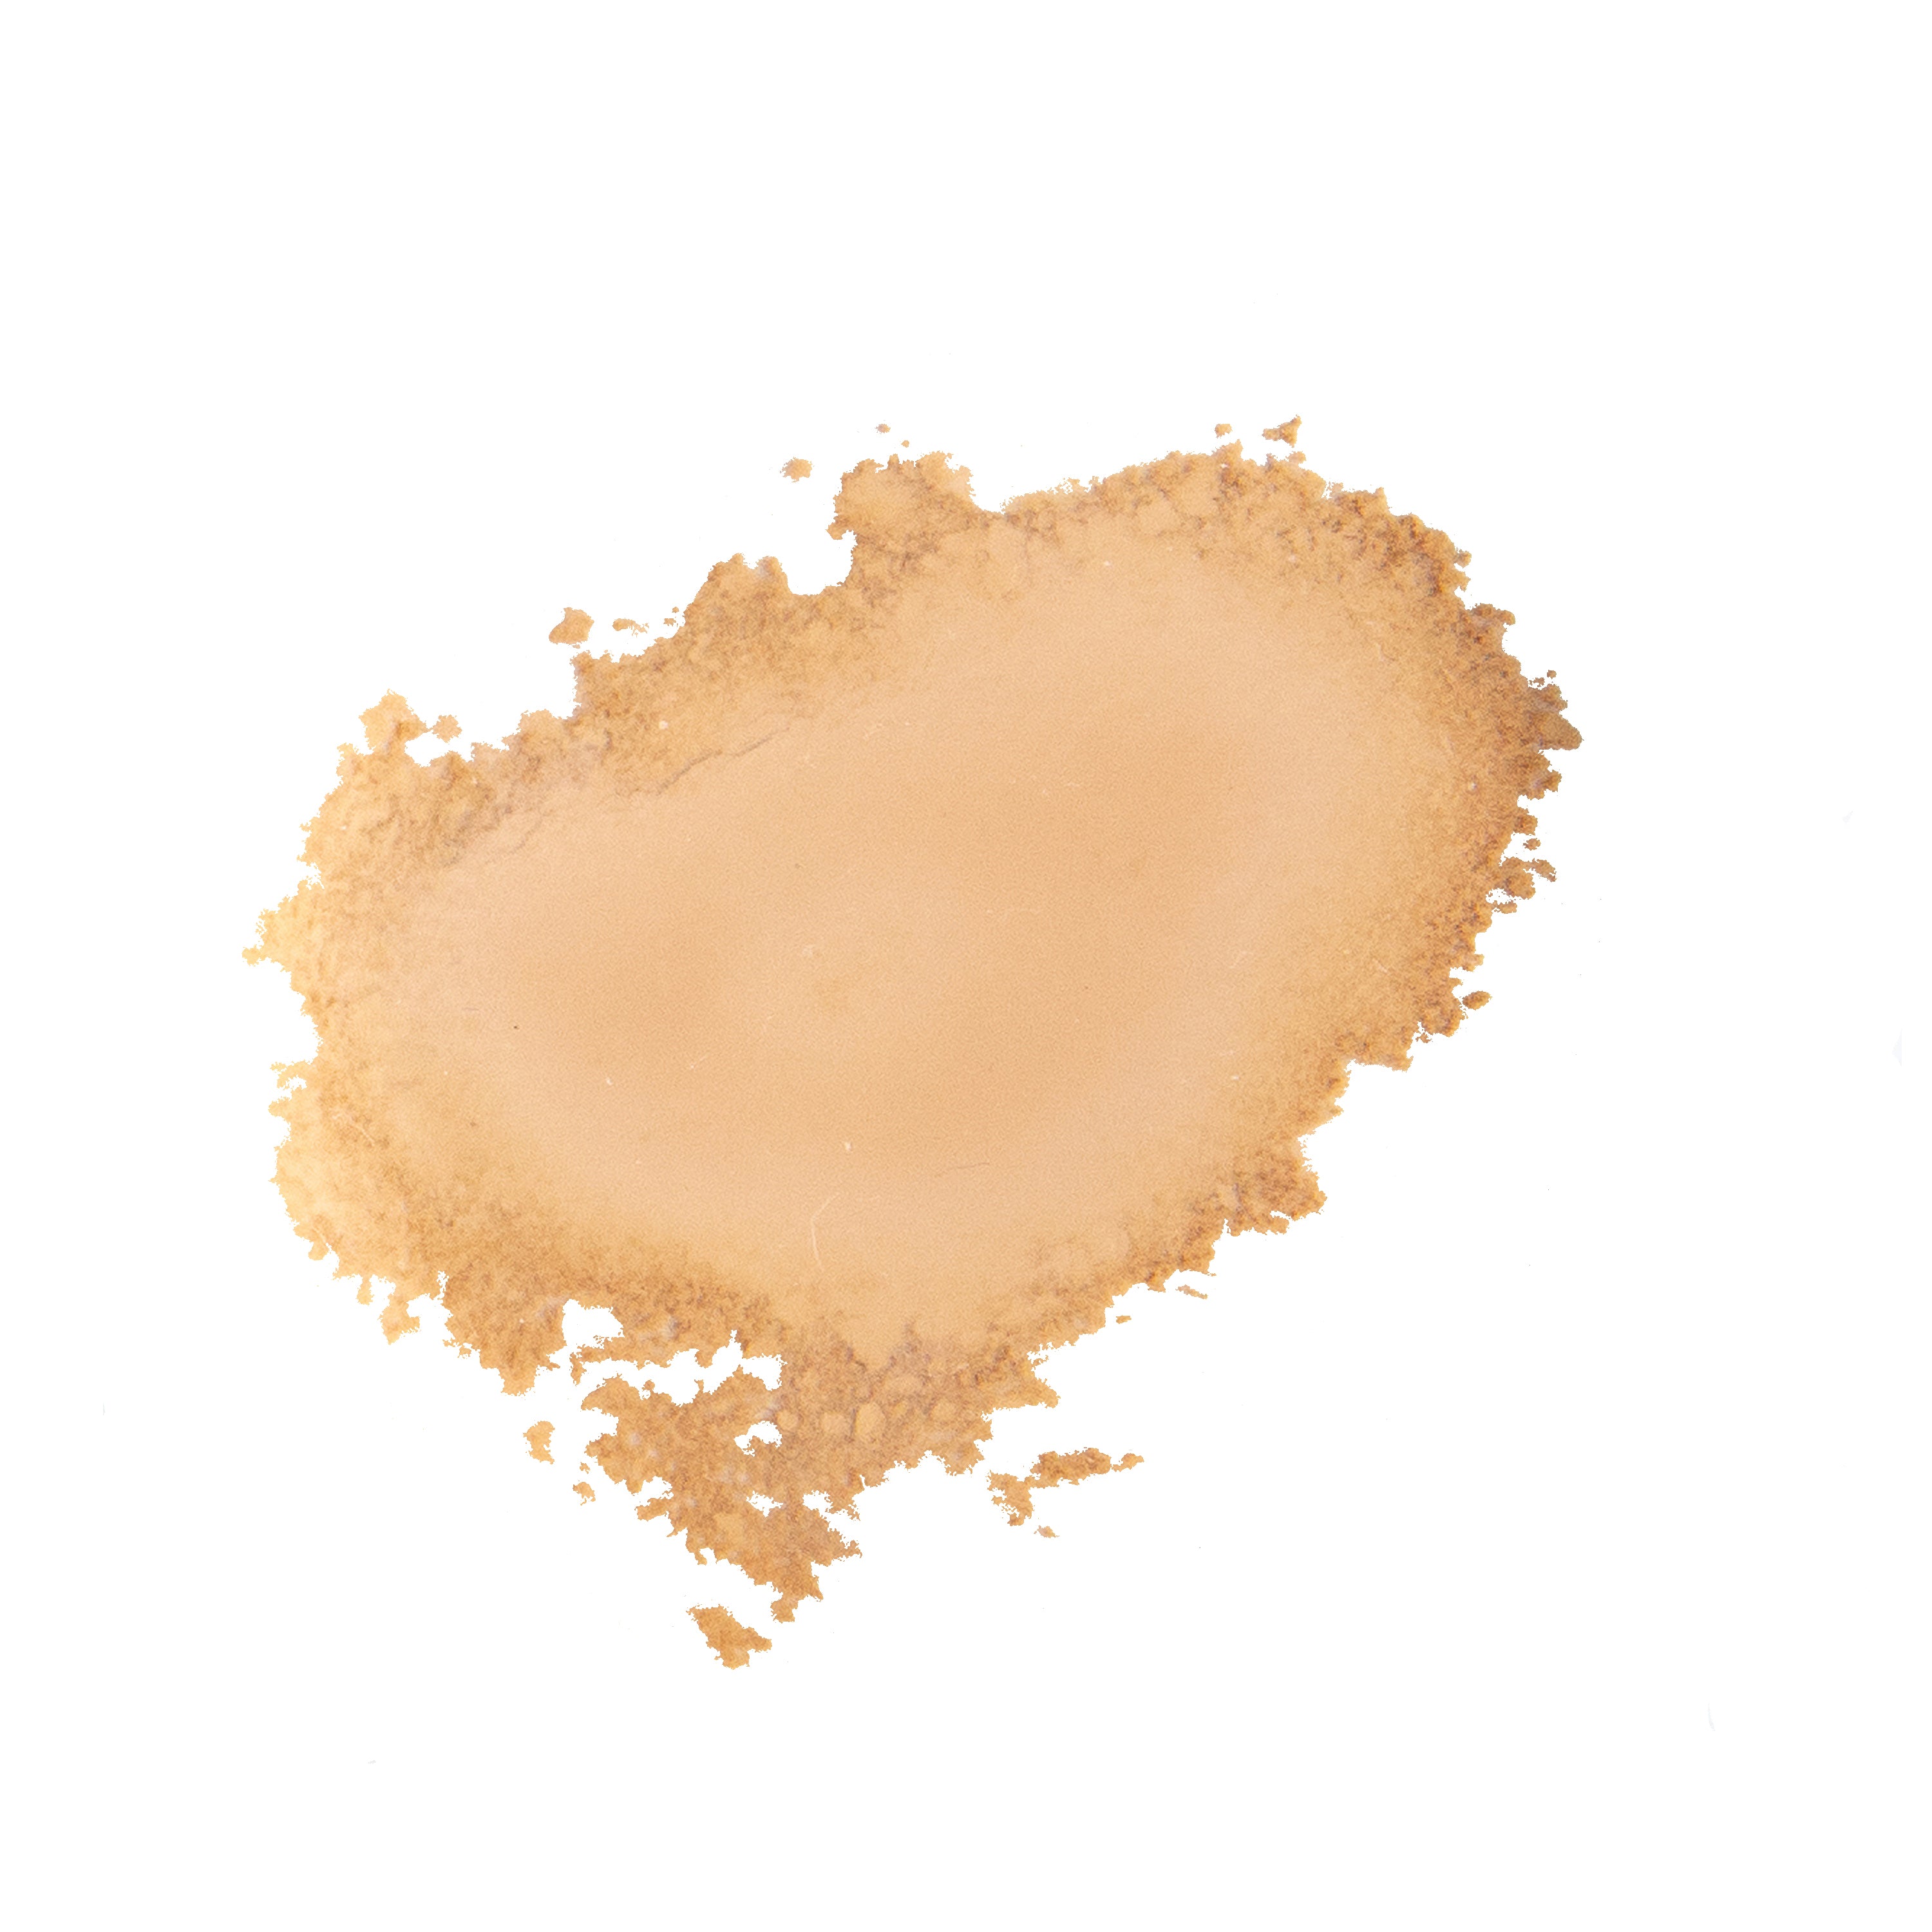 Swatch of Brush On Block® Touch of Tan Mineral Powder Sunscreen SPF 30.